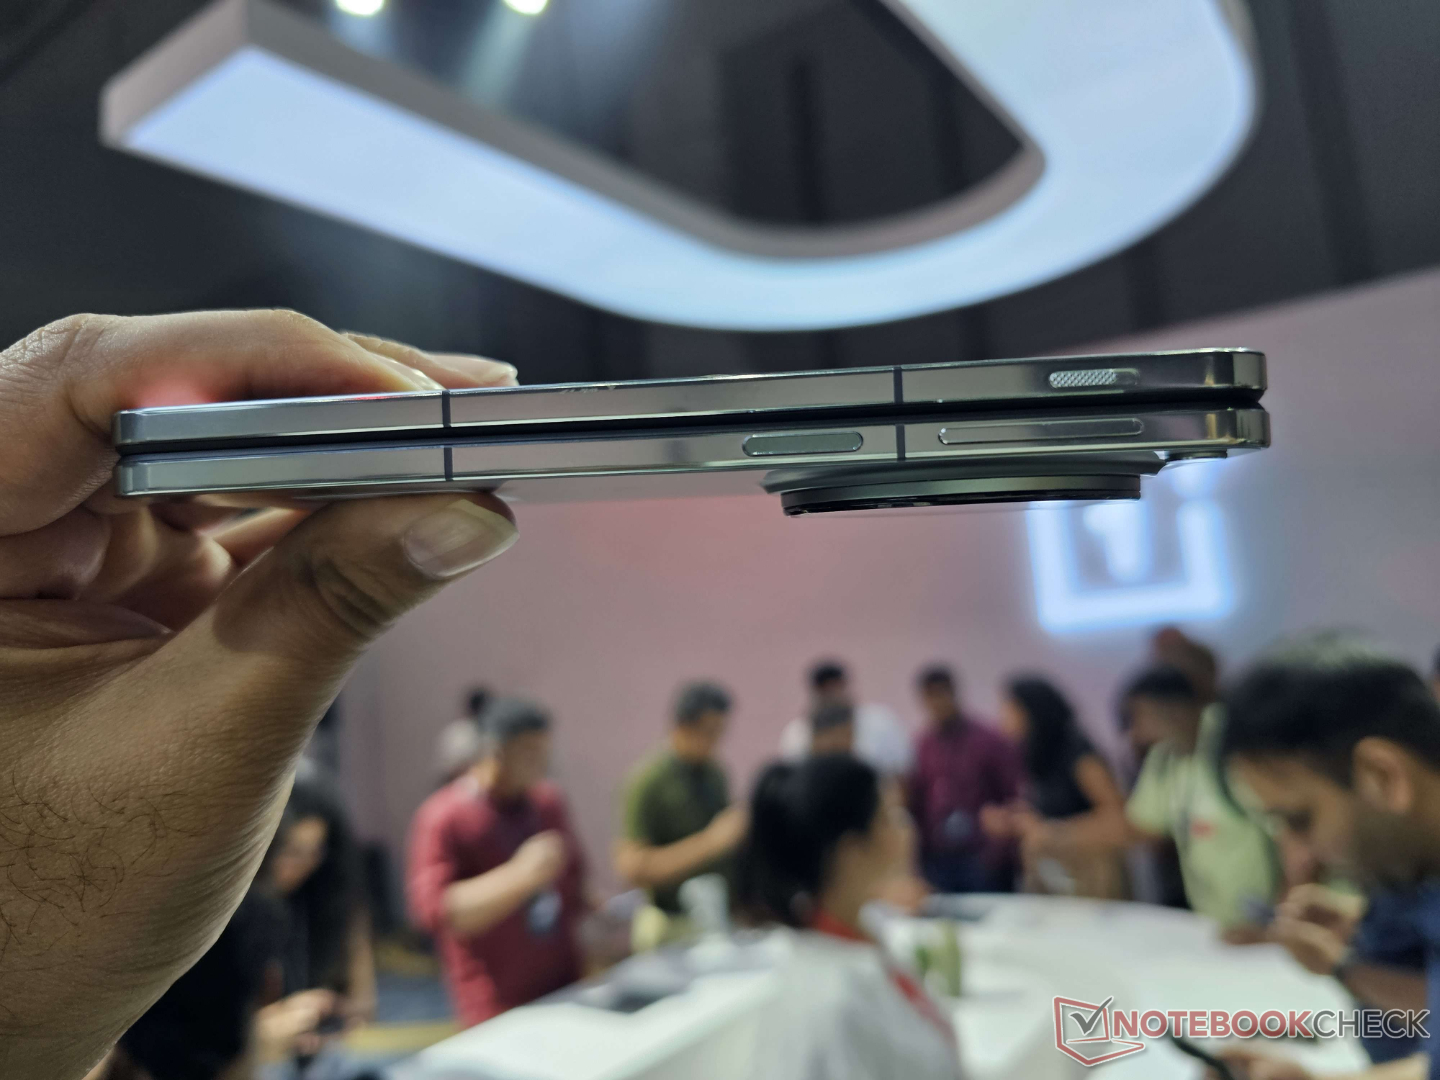 OnePlus Open gets an early hands-on video - Yahoo Sports